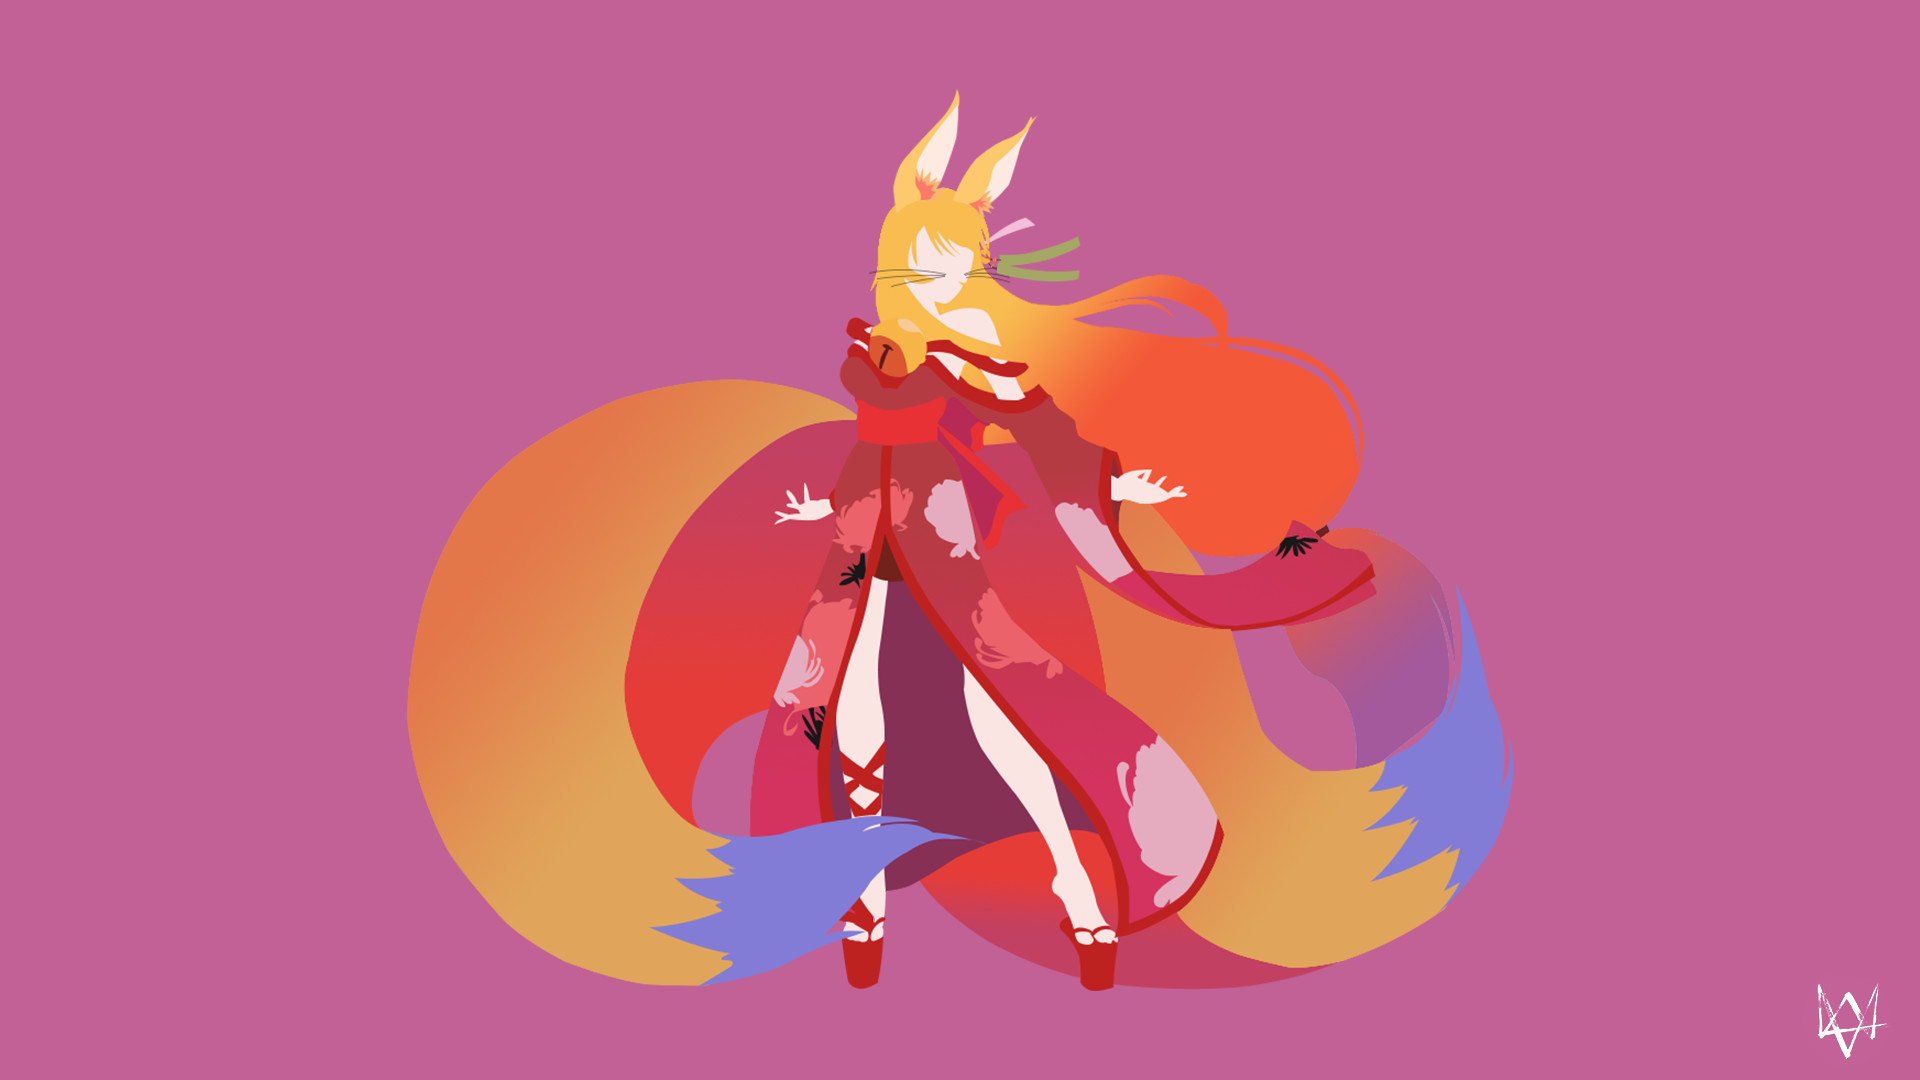 1920x1080 Miko (No Game No Life) Minimalist Anime Wallpaper by Lucifer012 on .